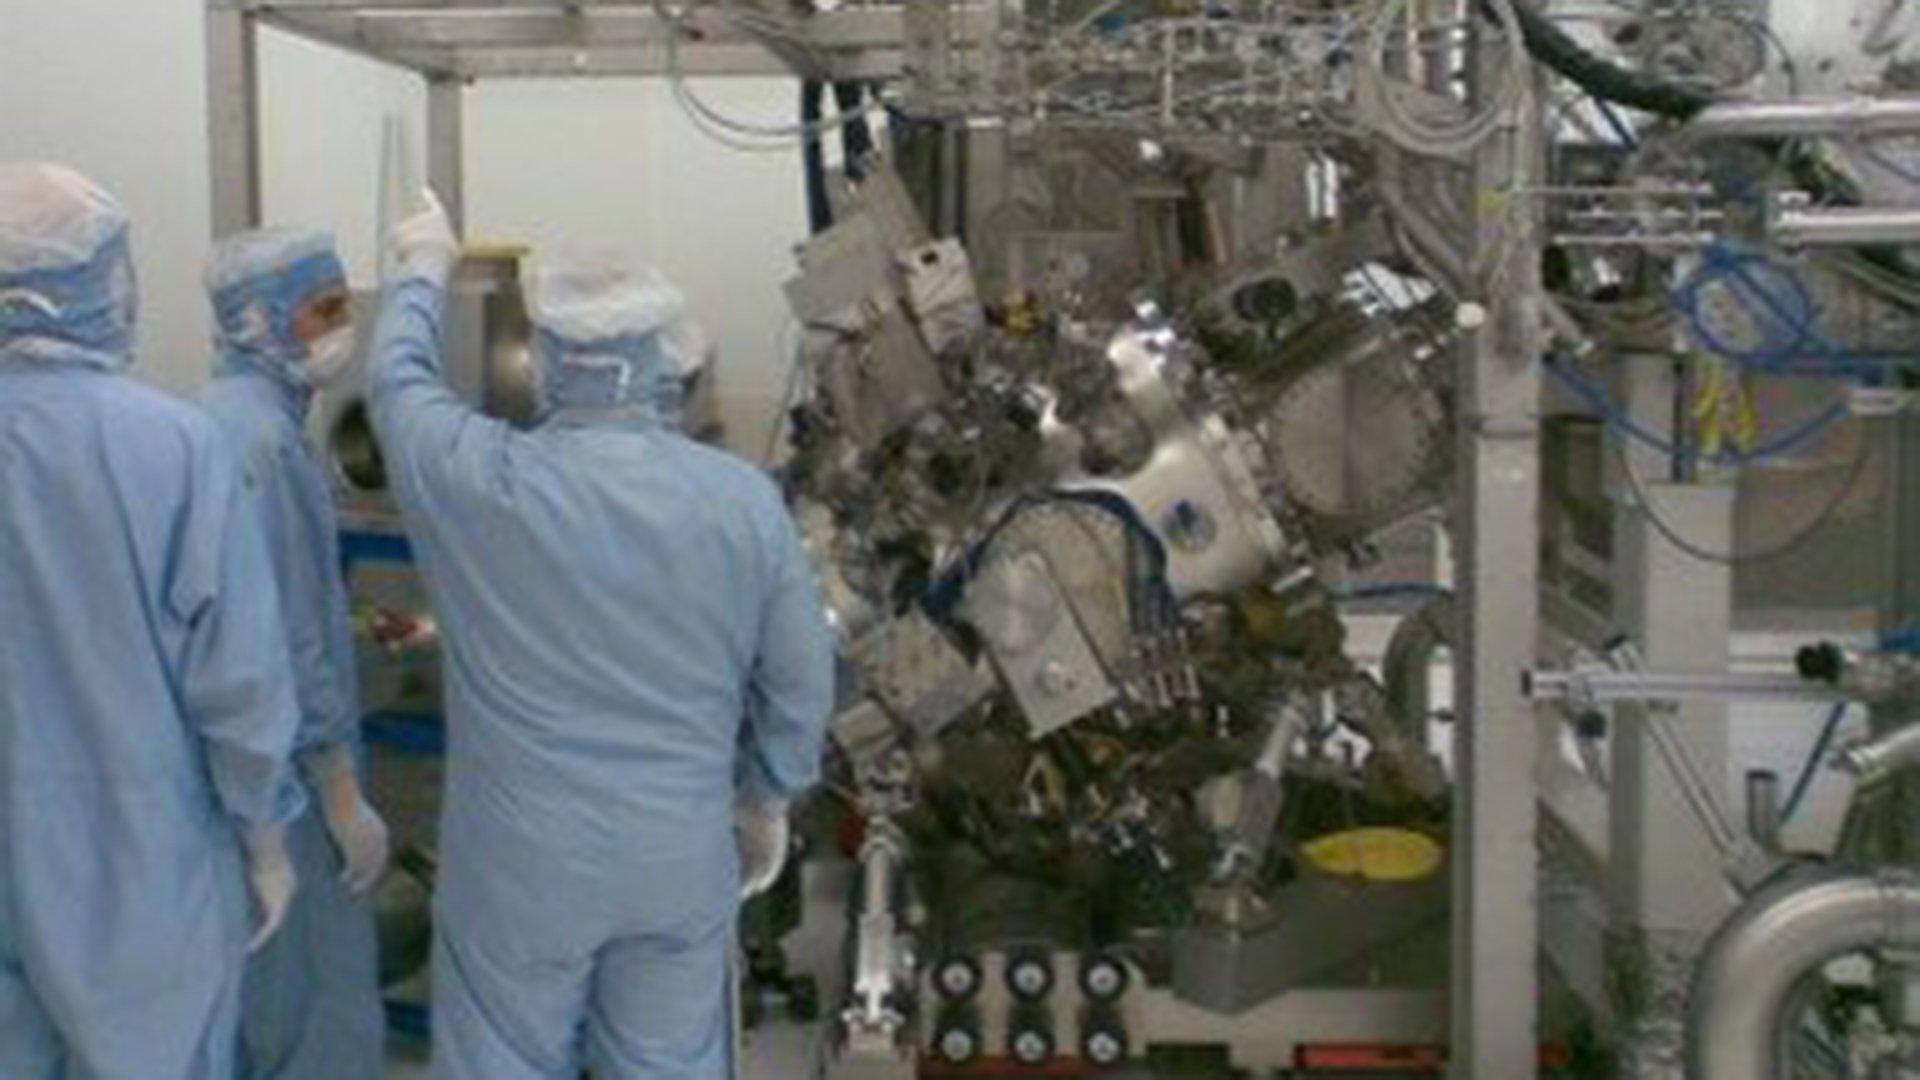 Three ASML cleanroom engineers stand next to a Cymer EUV light source.